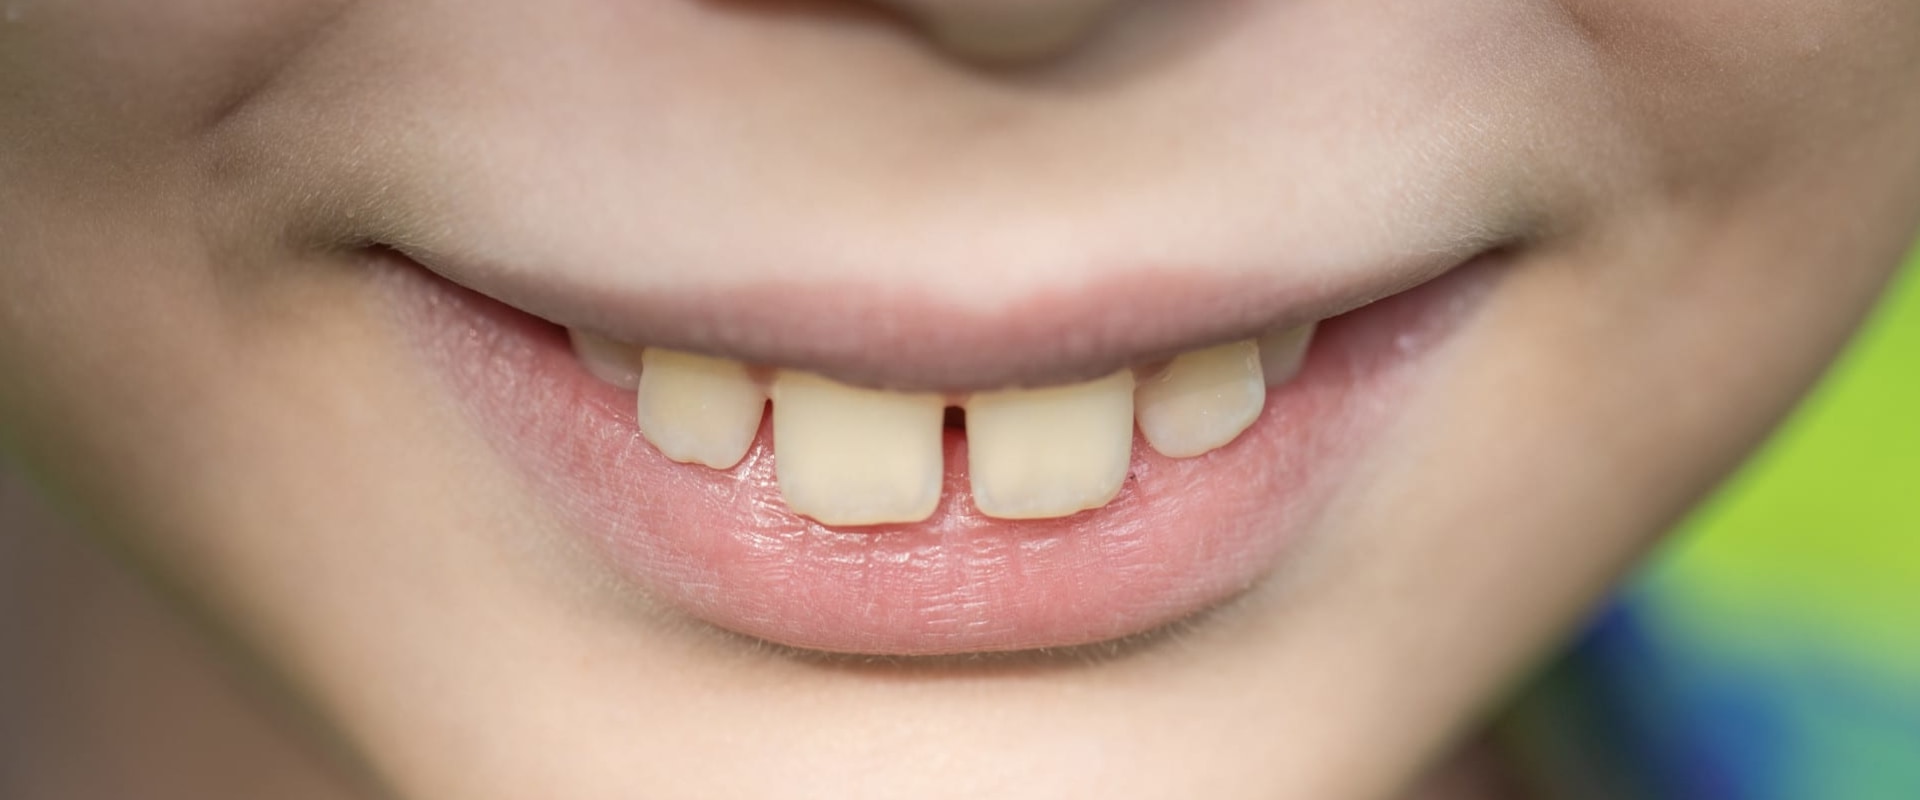 What to Do if Your Teeth Move Out of Place During Orthodontic Treatment